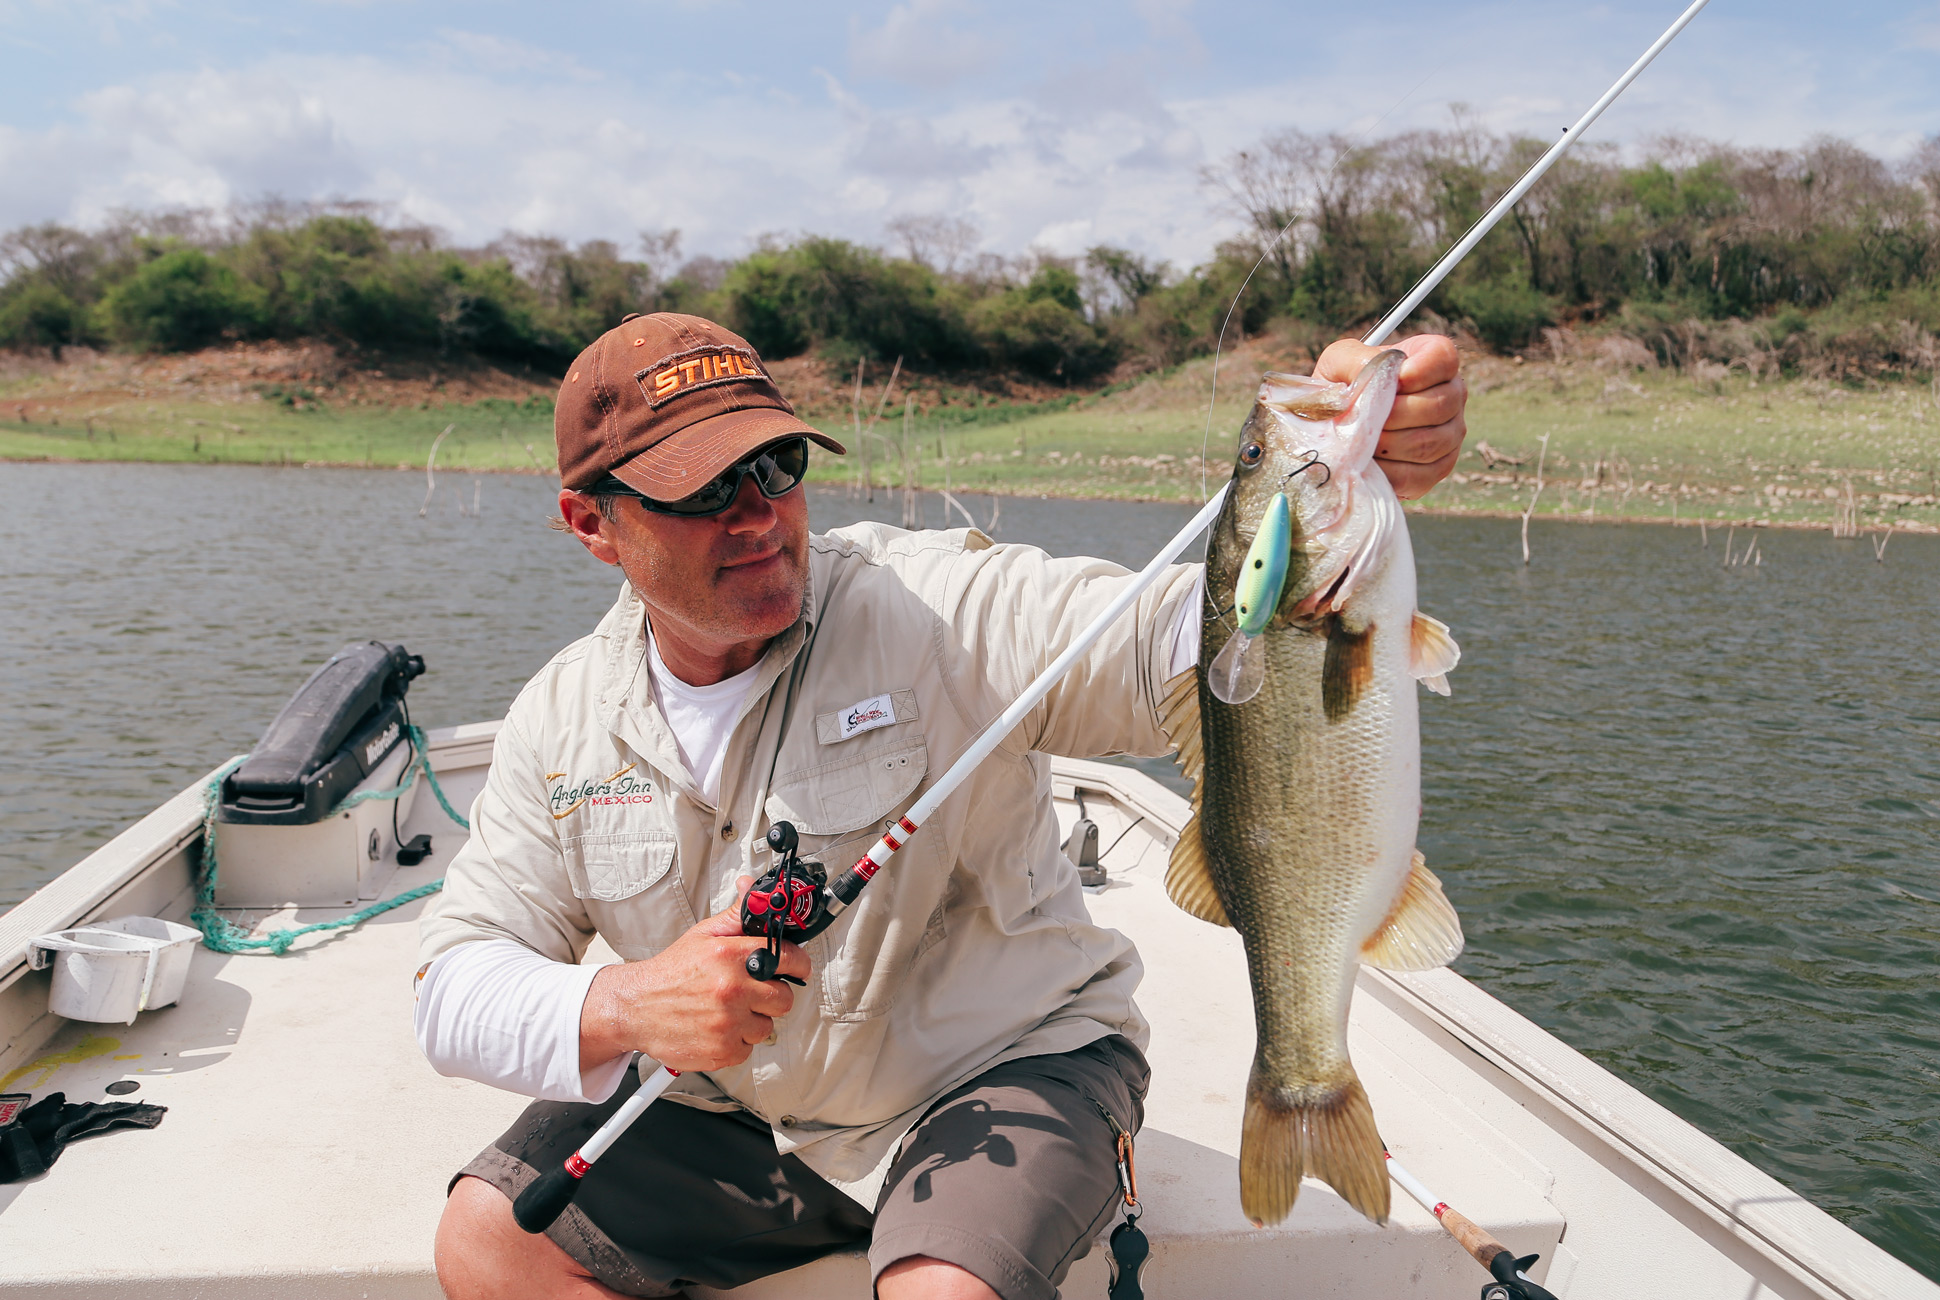 “The secret is,” Kramer said, “Joe still really likes this. He’s having fun. The best stuff that we get is when the fishing’s really good. And he and his guests are having a good time. And they forget the camera is there.”